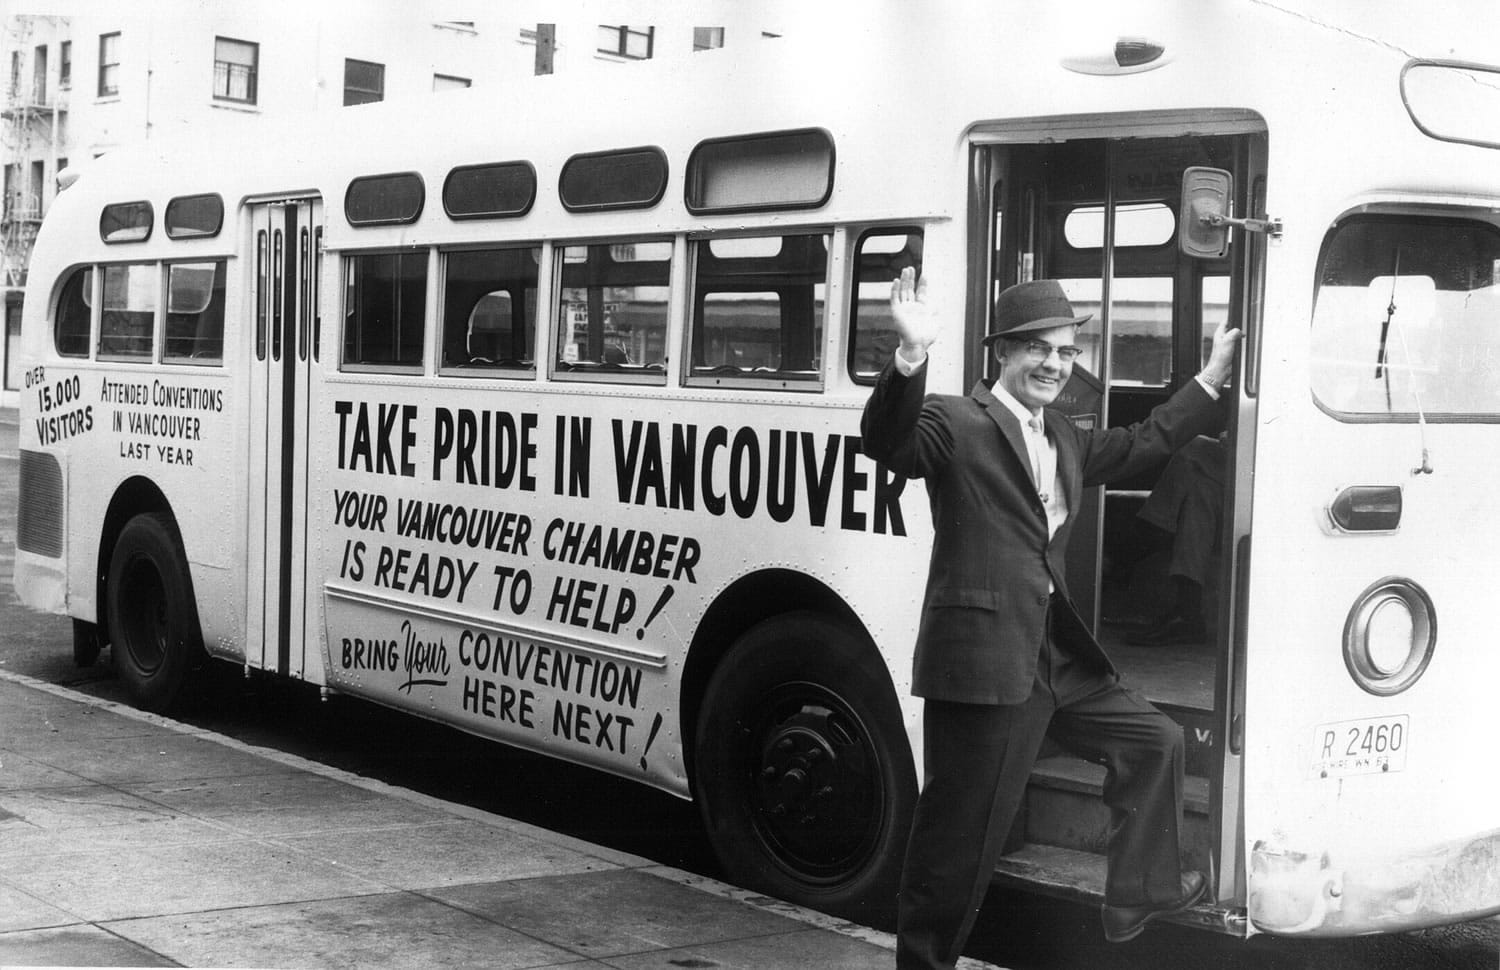 Clark County Historical Museum
Emmet J. Onslow, director of the tourist and convention committee of the Greater Vancouver Chamber of Commerce, boards a city bus encouraging organizations to bring their convention to the city in 1963. The chamber is celebrating its 125th birthday this year.